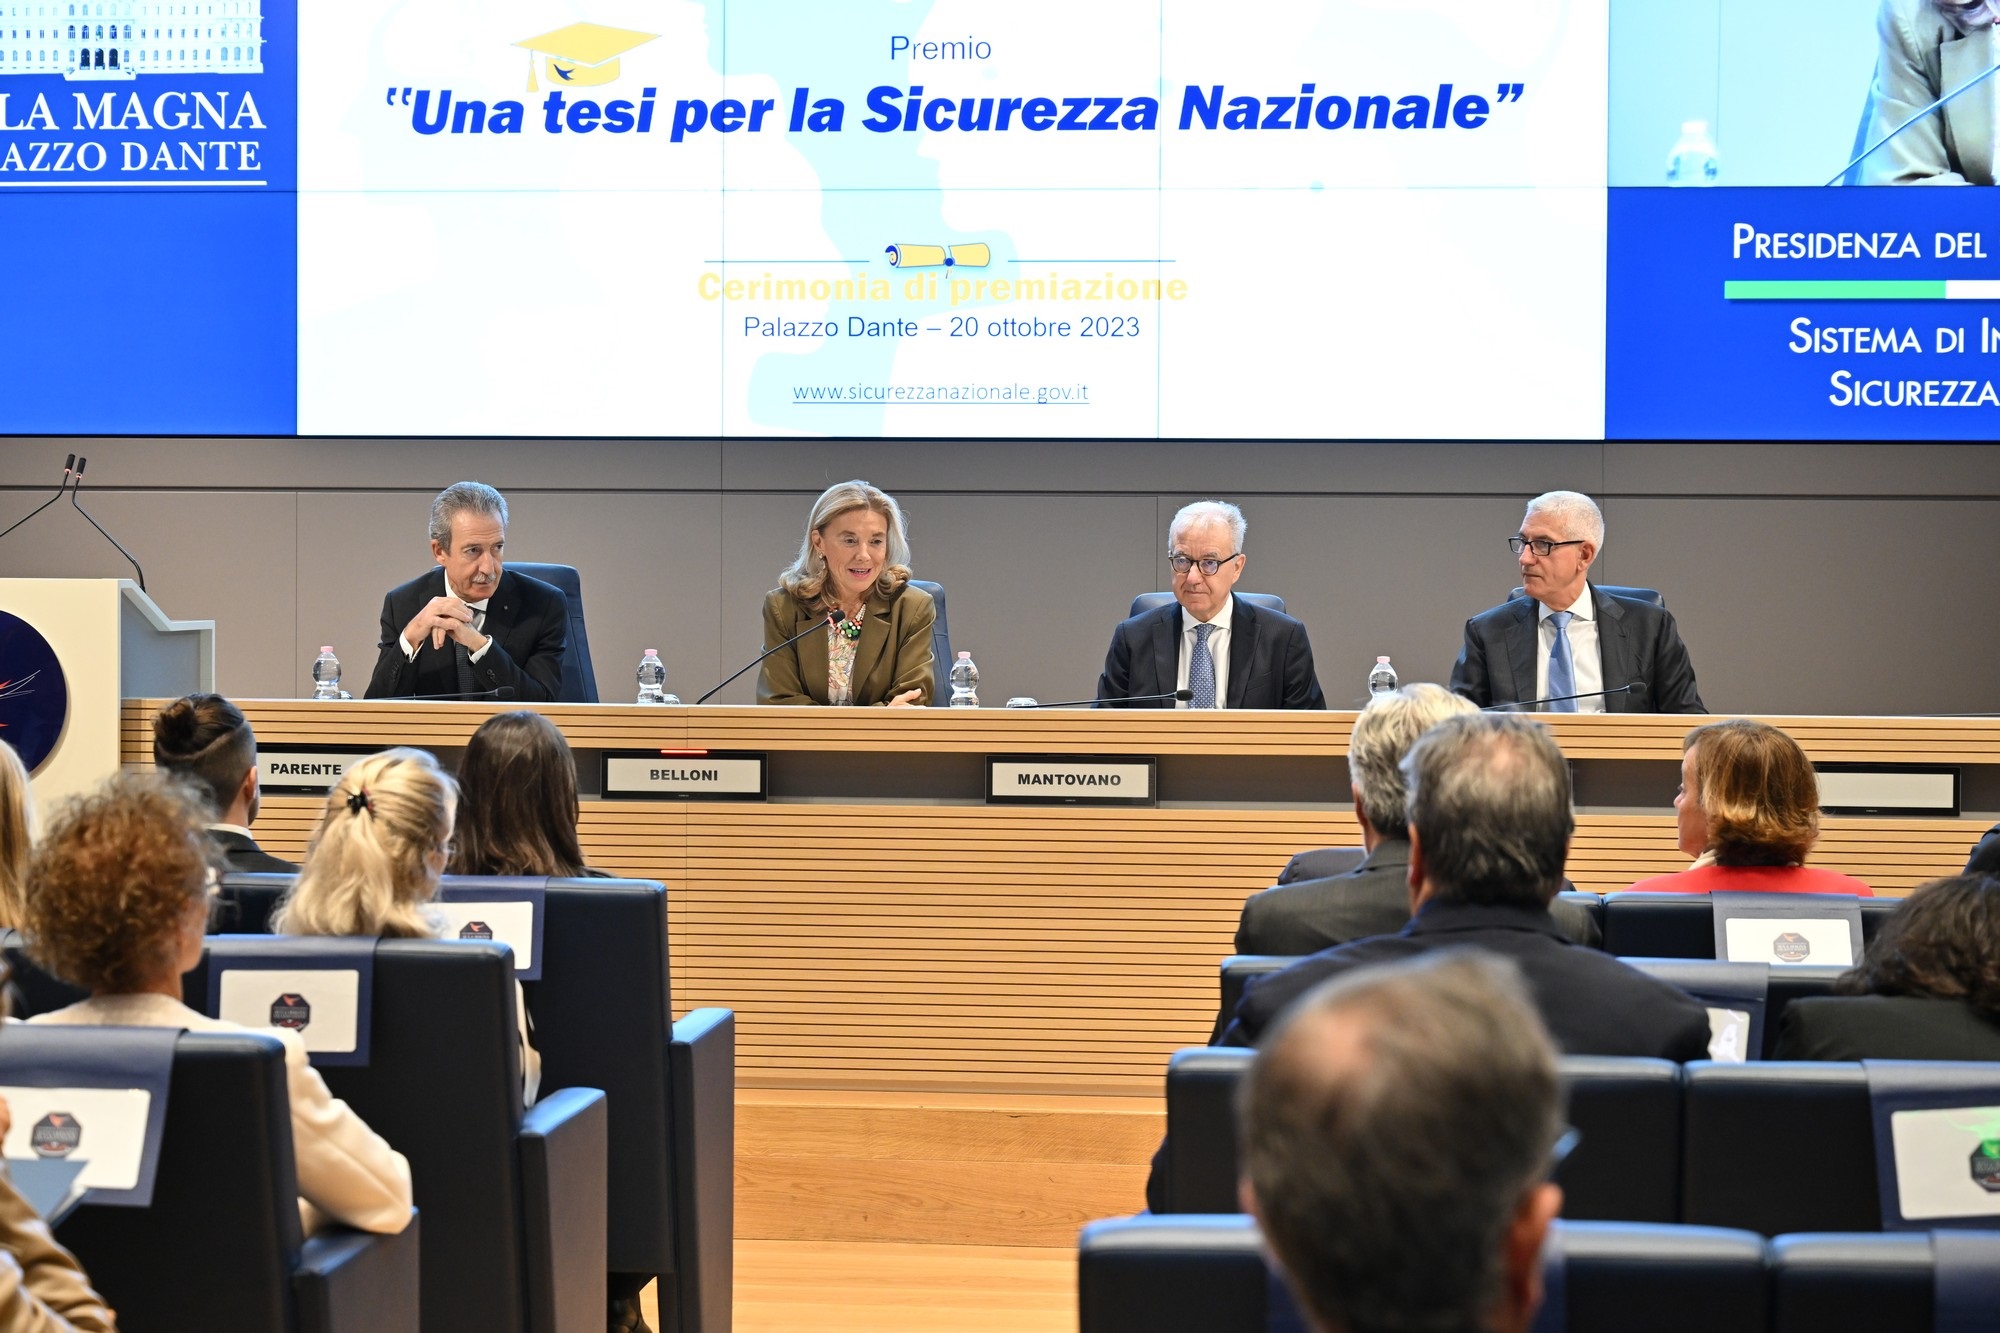 From left to right: - Mario Parente, AISI Director - Elisabetta Belloni, DIS General Director - Alfredo Mantovano, Delegated Authority for the Security of the Republic - Giovanni Caravelli, AISE Director